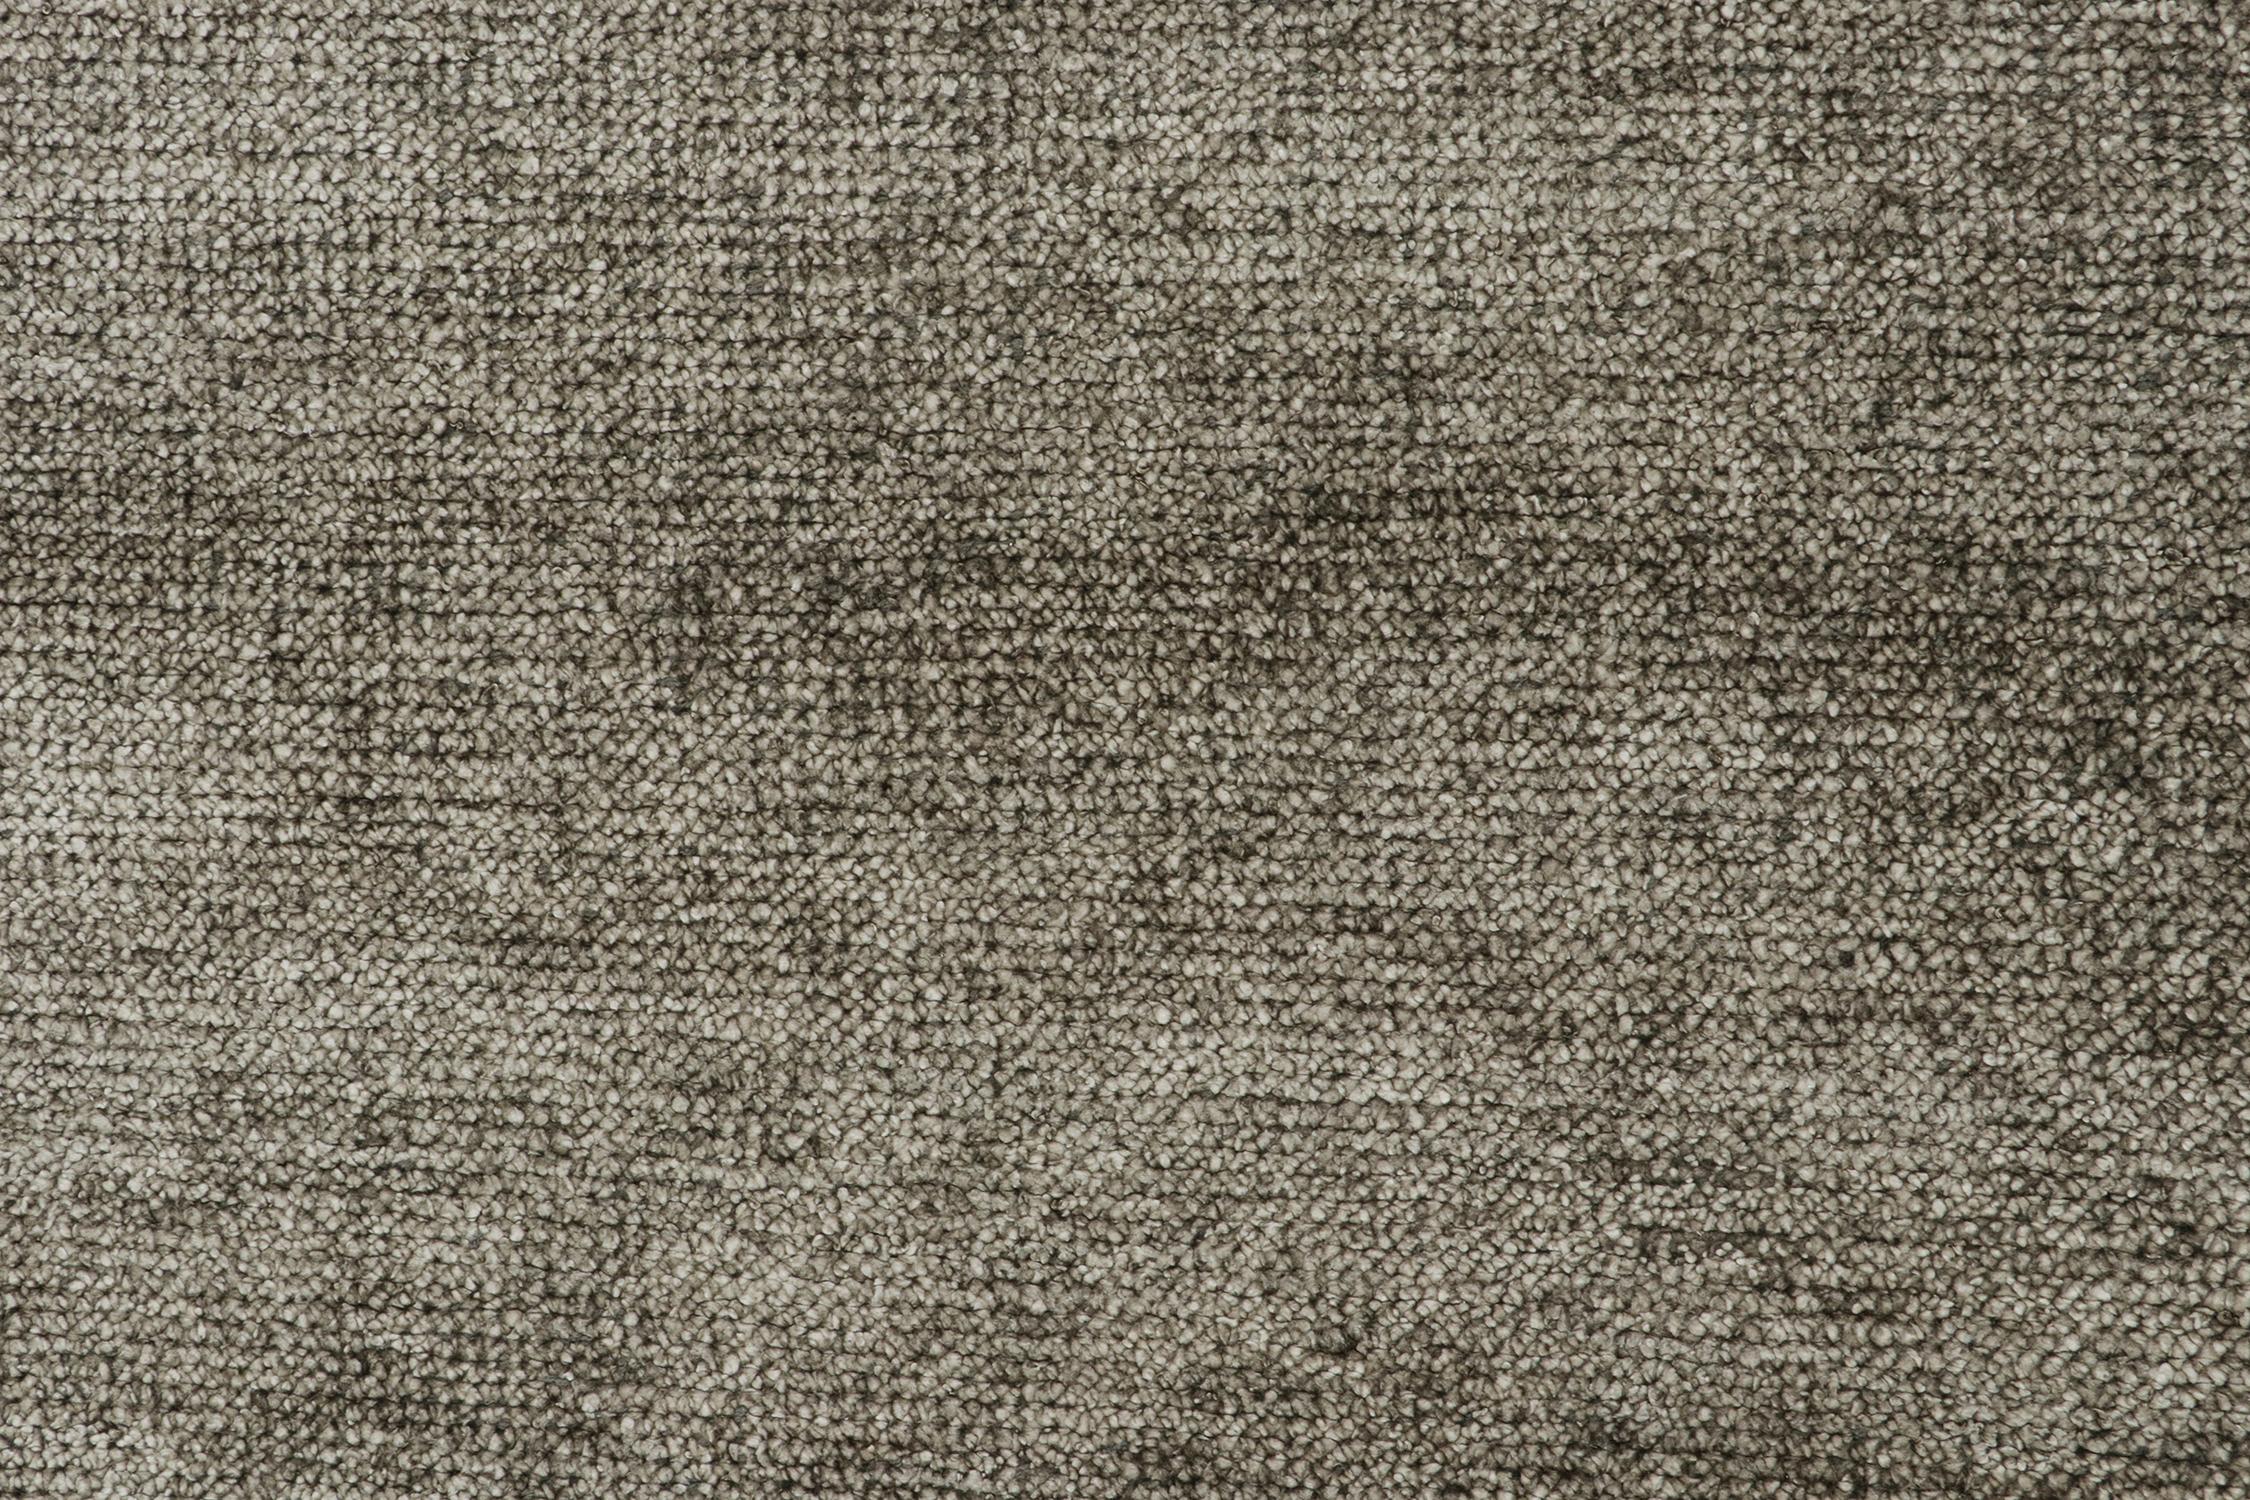 Contemporary Rug & Kilim’s Modern Rug in Solid Silver-Grey Tone-on-tone Striae For Sale